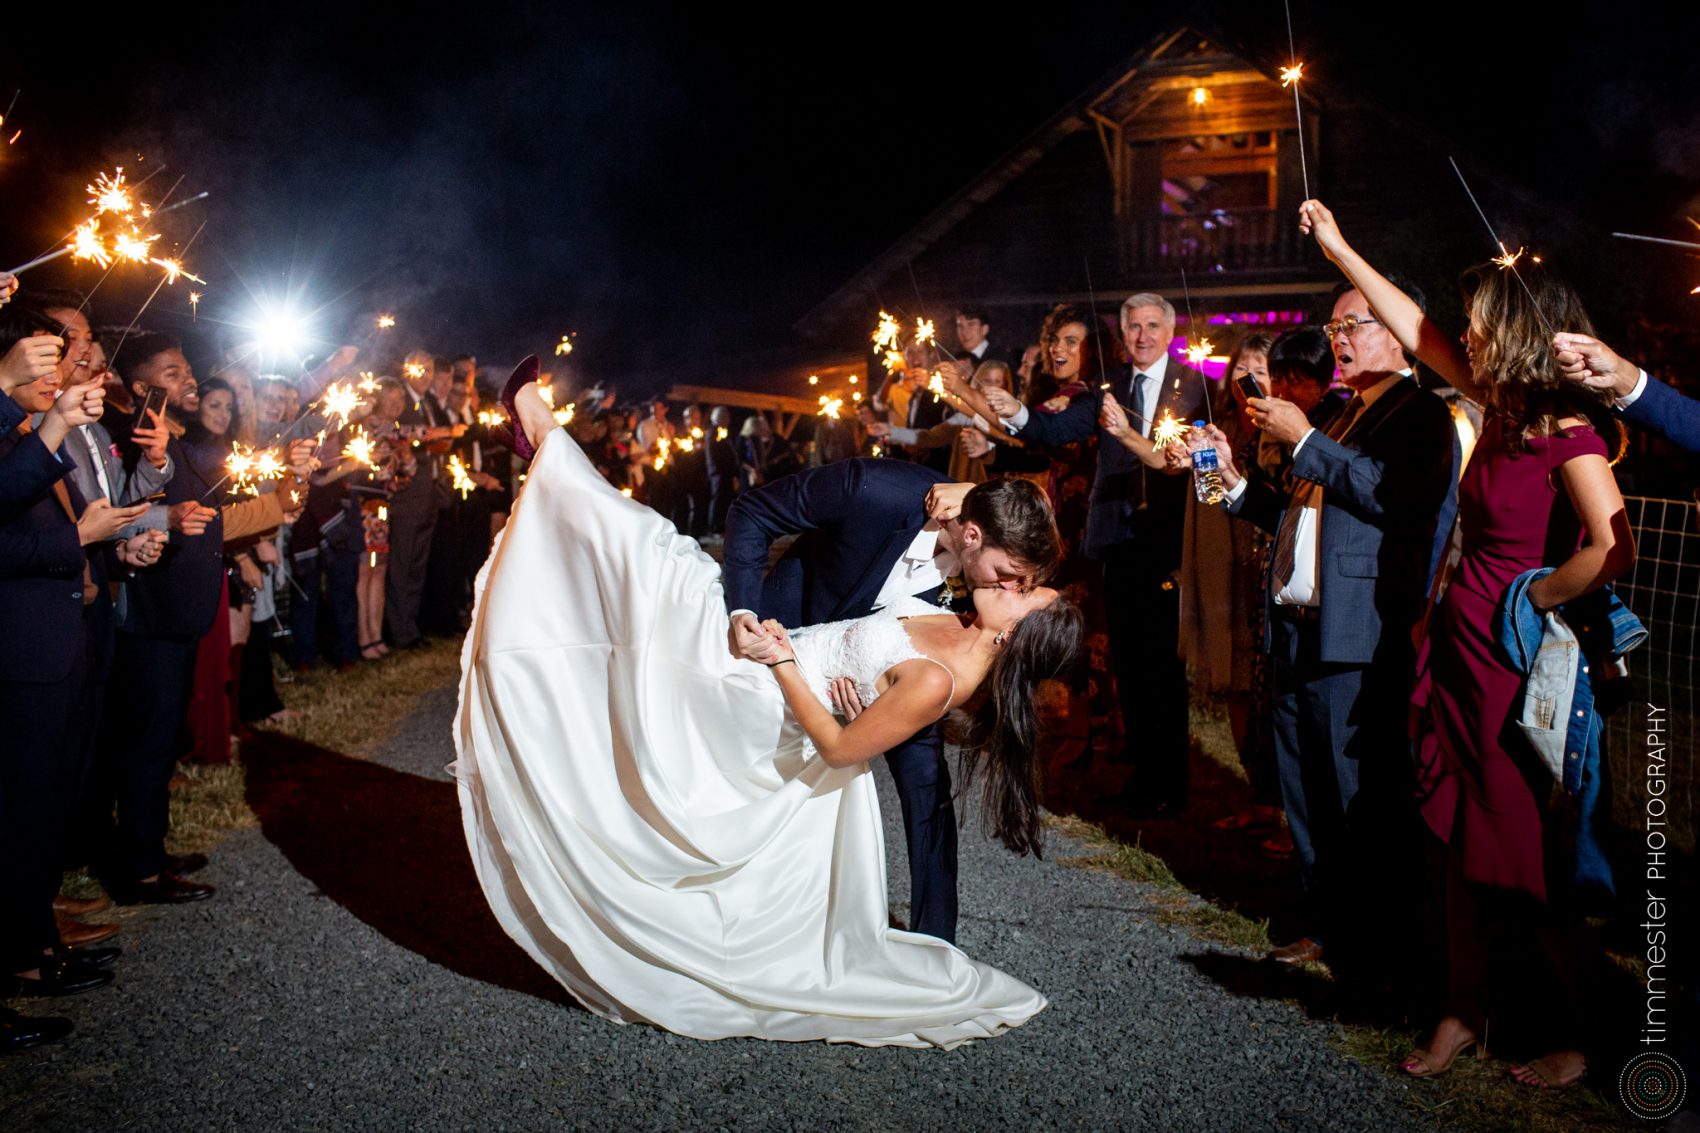 A bride and groom's wedding day and sparkler exit at Sassafras Fork Farm in Rougemont, NC.